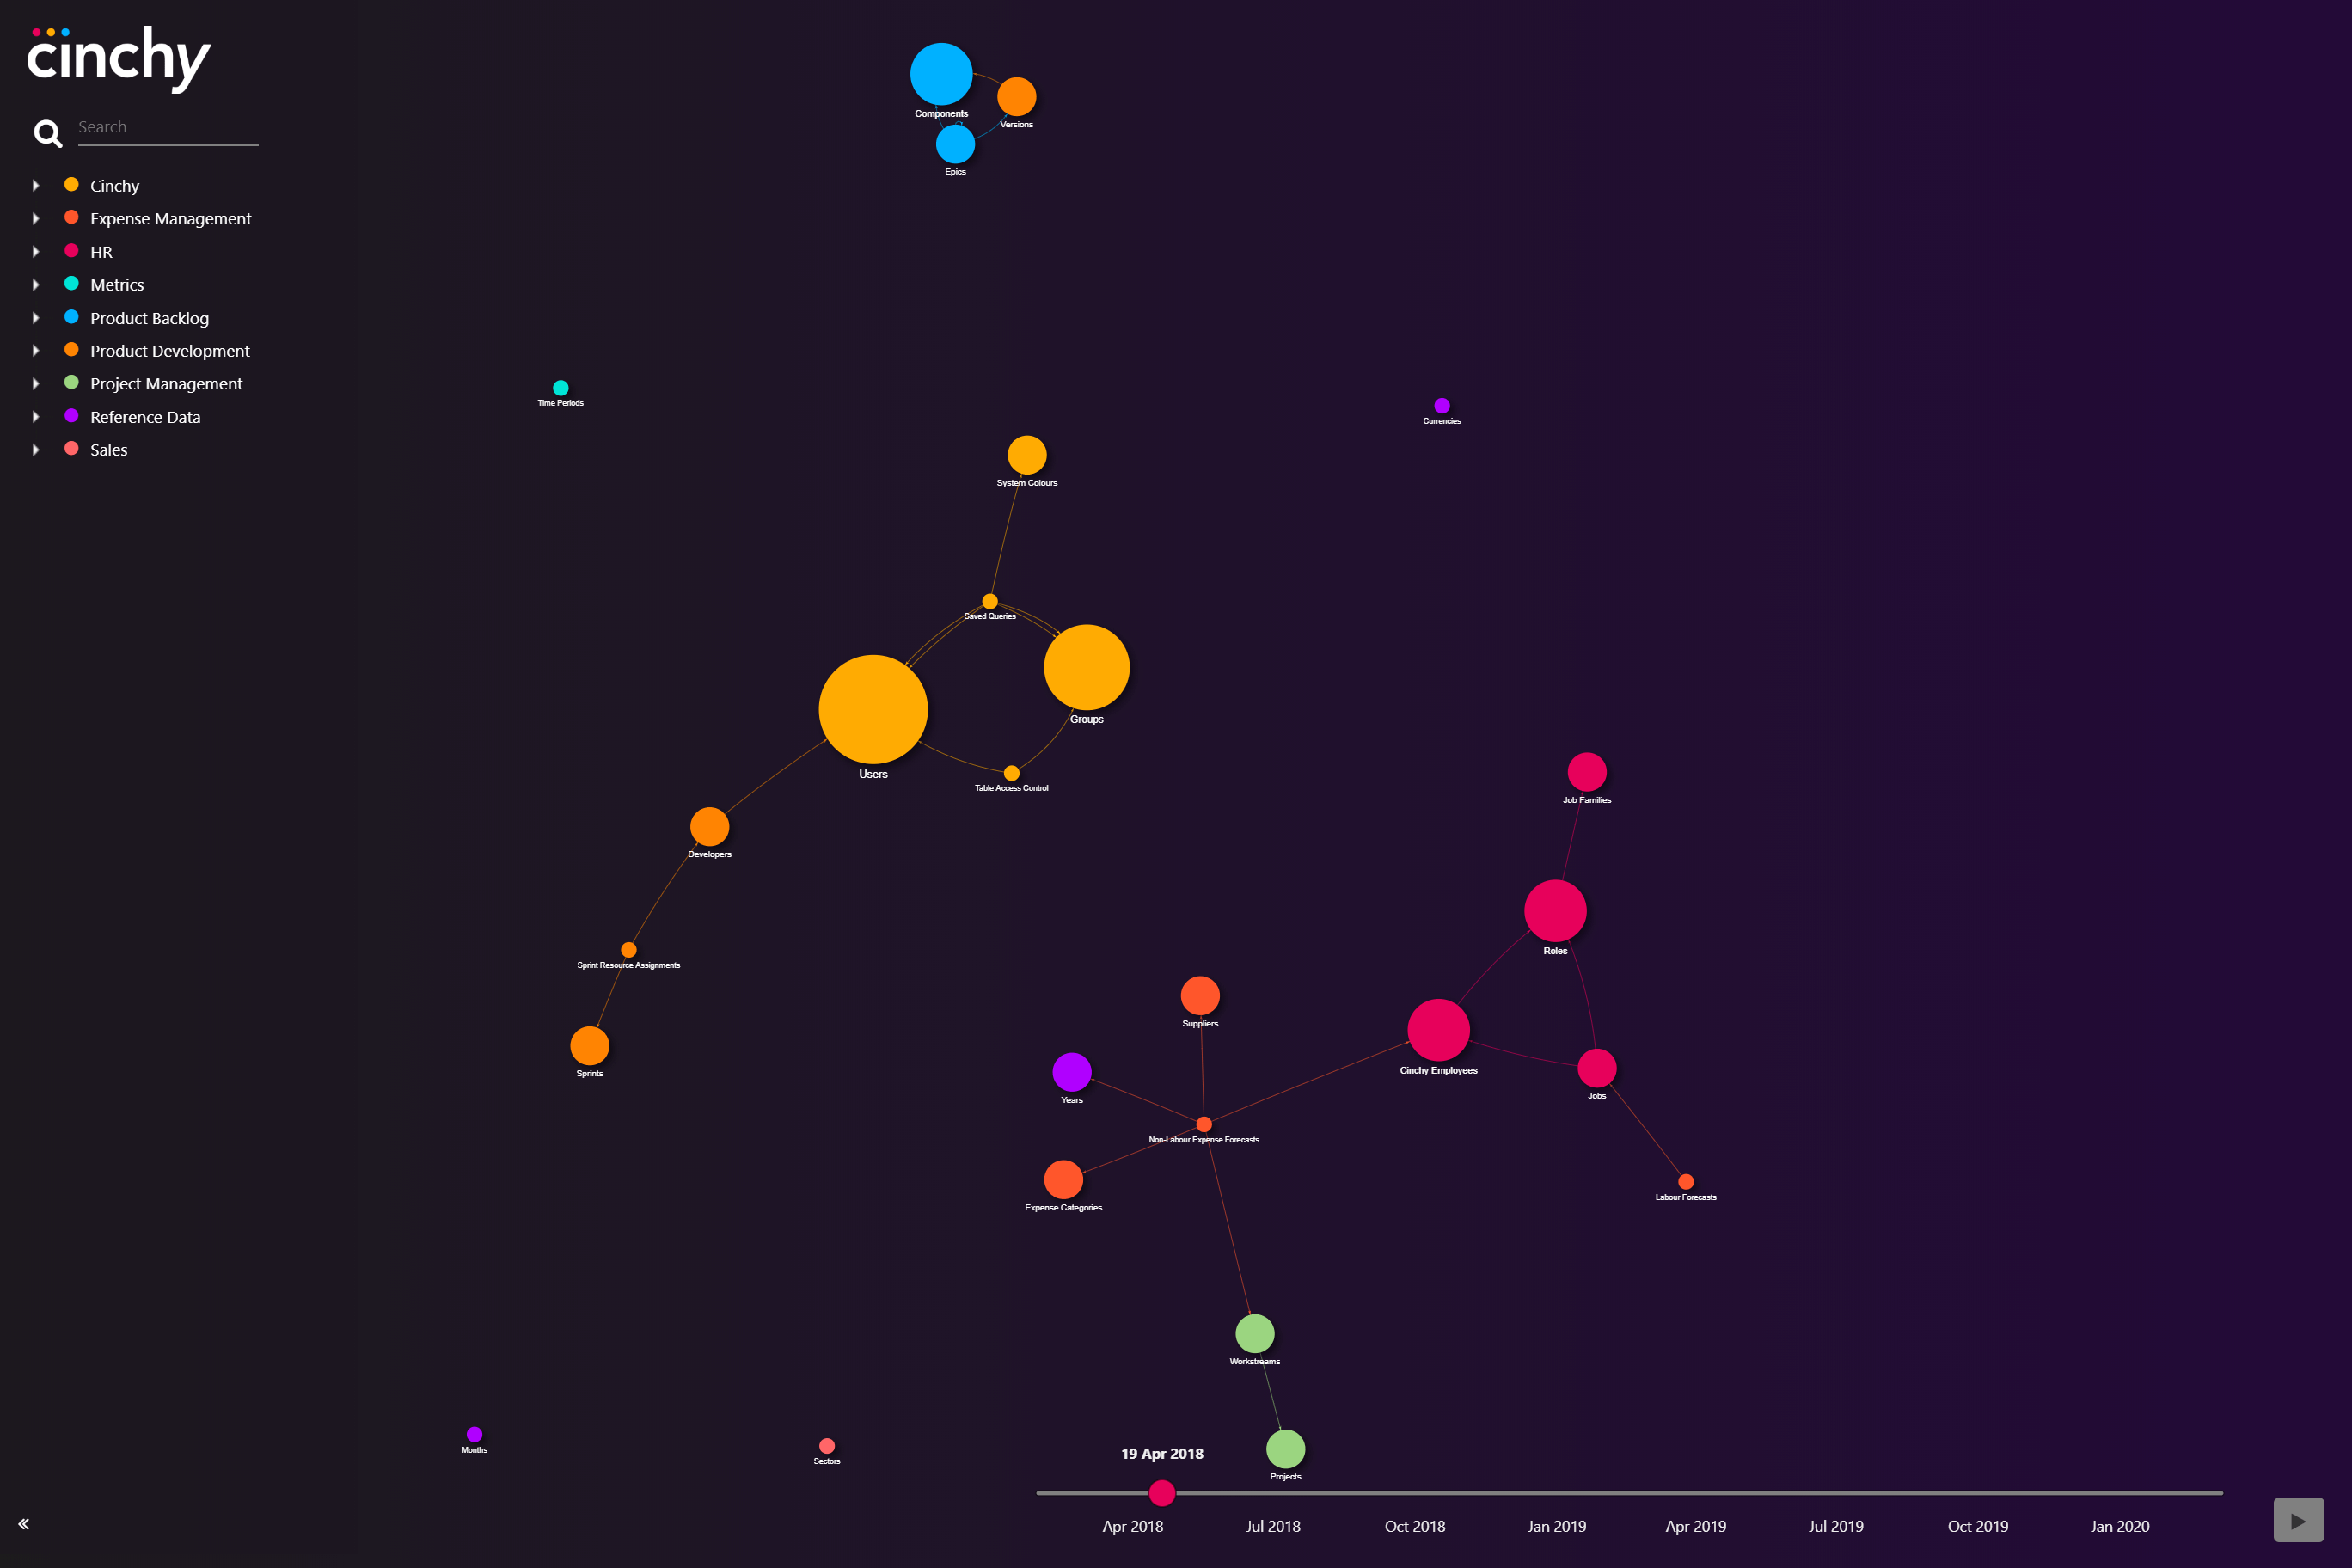 Data Network Visualizer 2 (multiple project stage)